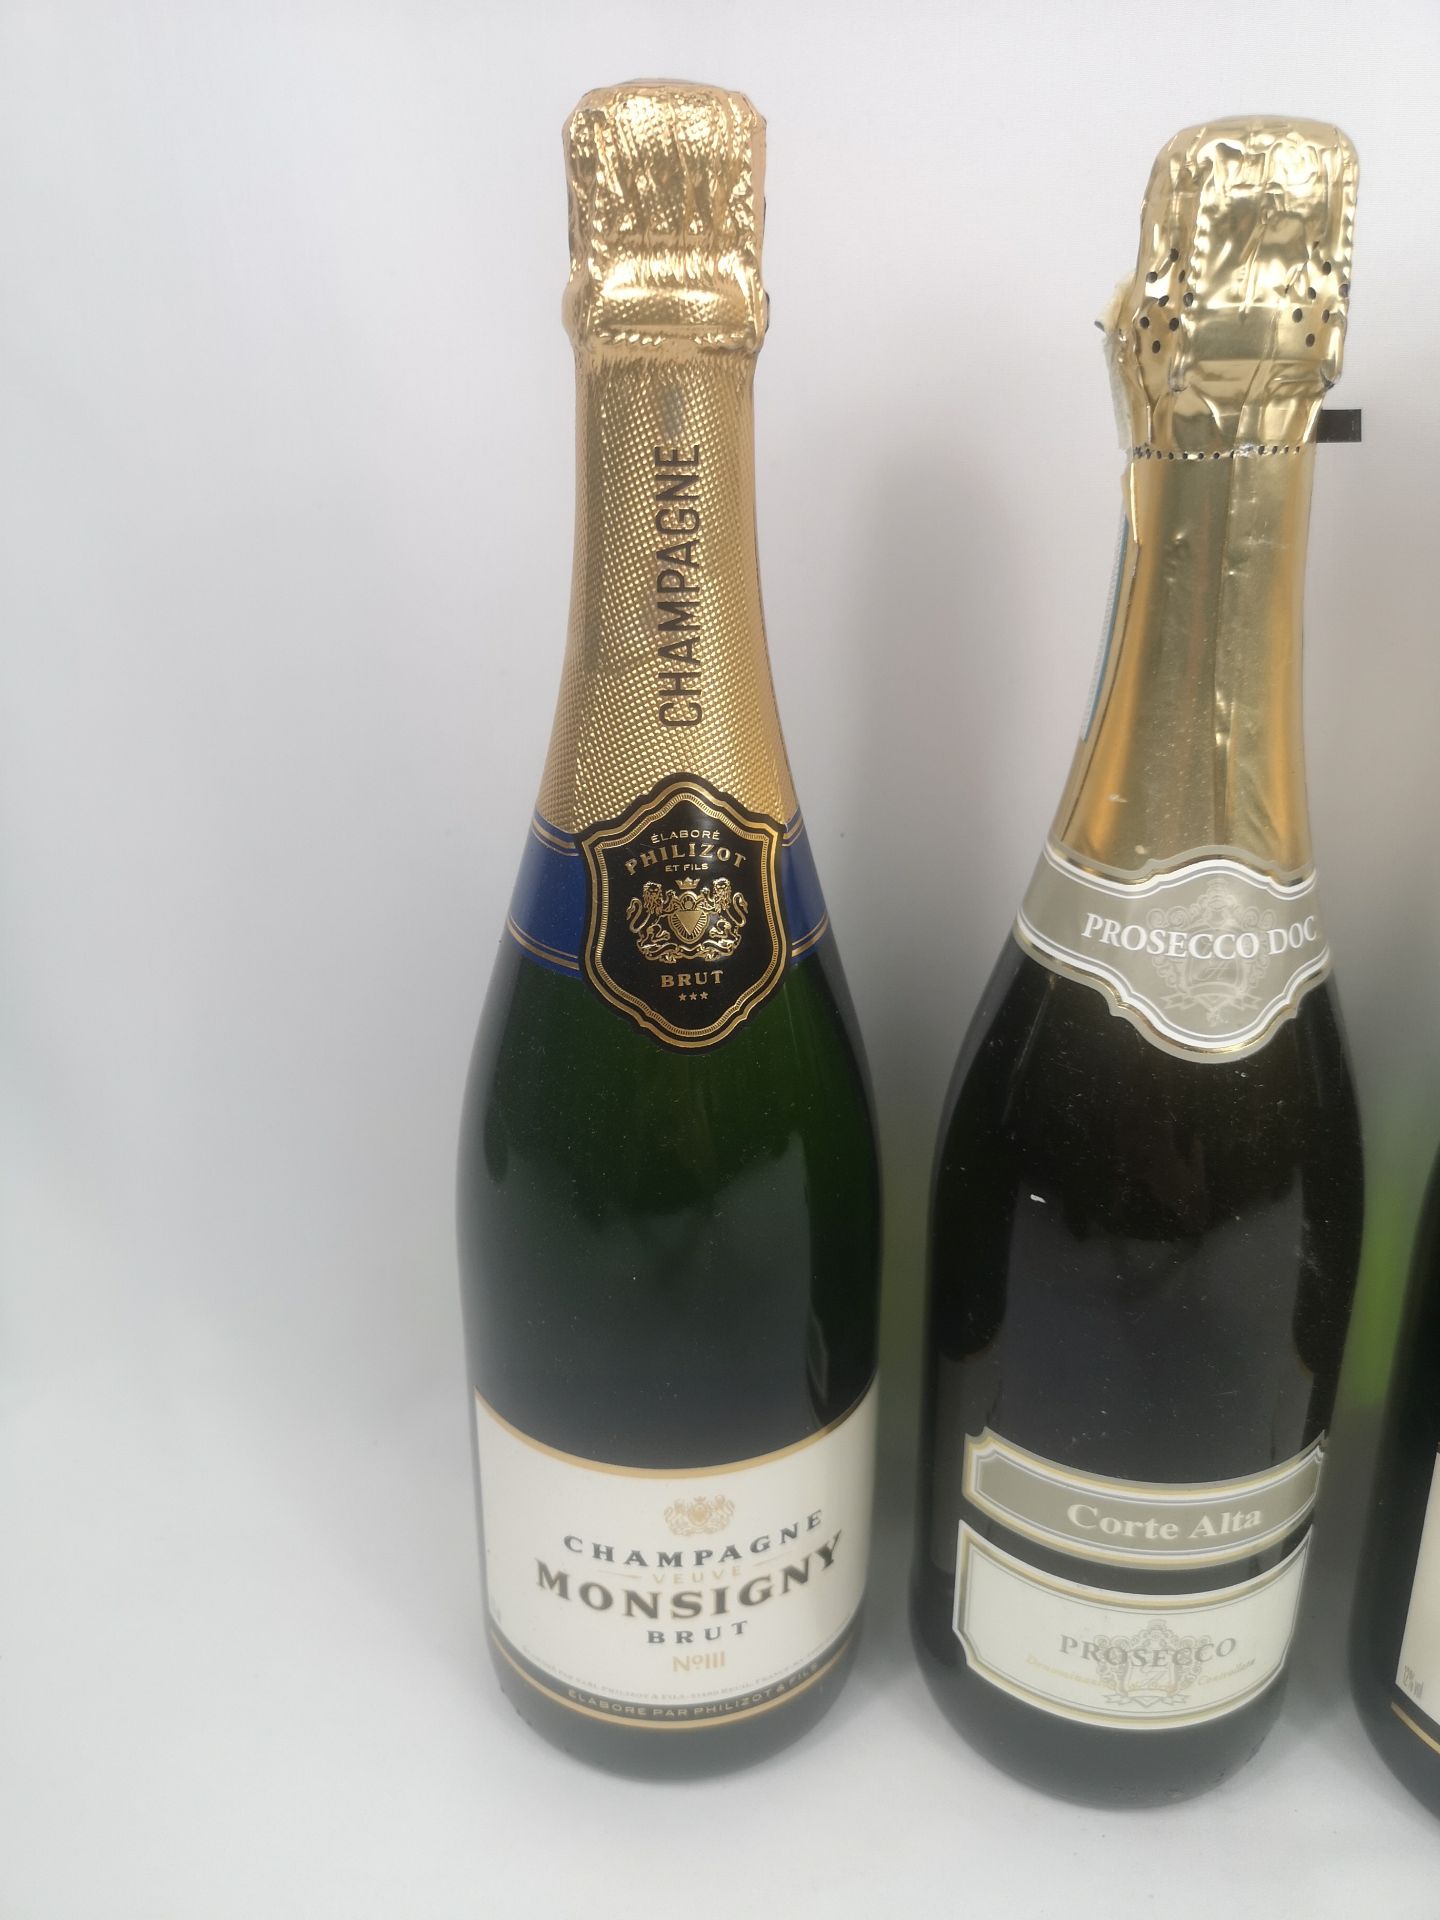 Five 75cl bottles of Monsigny Brut together with a 75cl bottle of Corte Alta Prosecco - Image 2 of 6